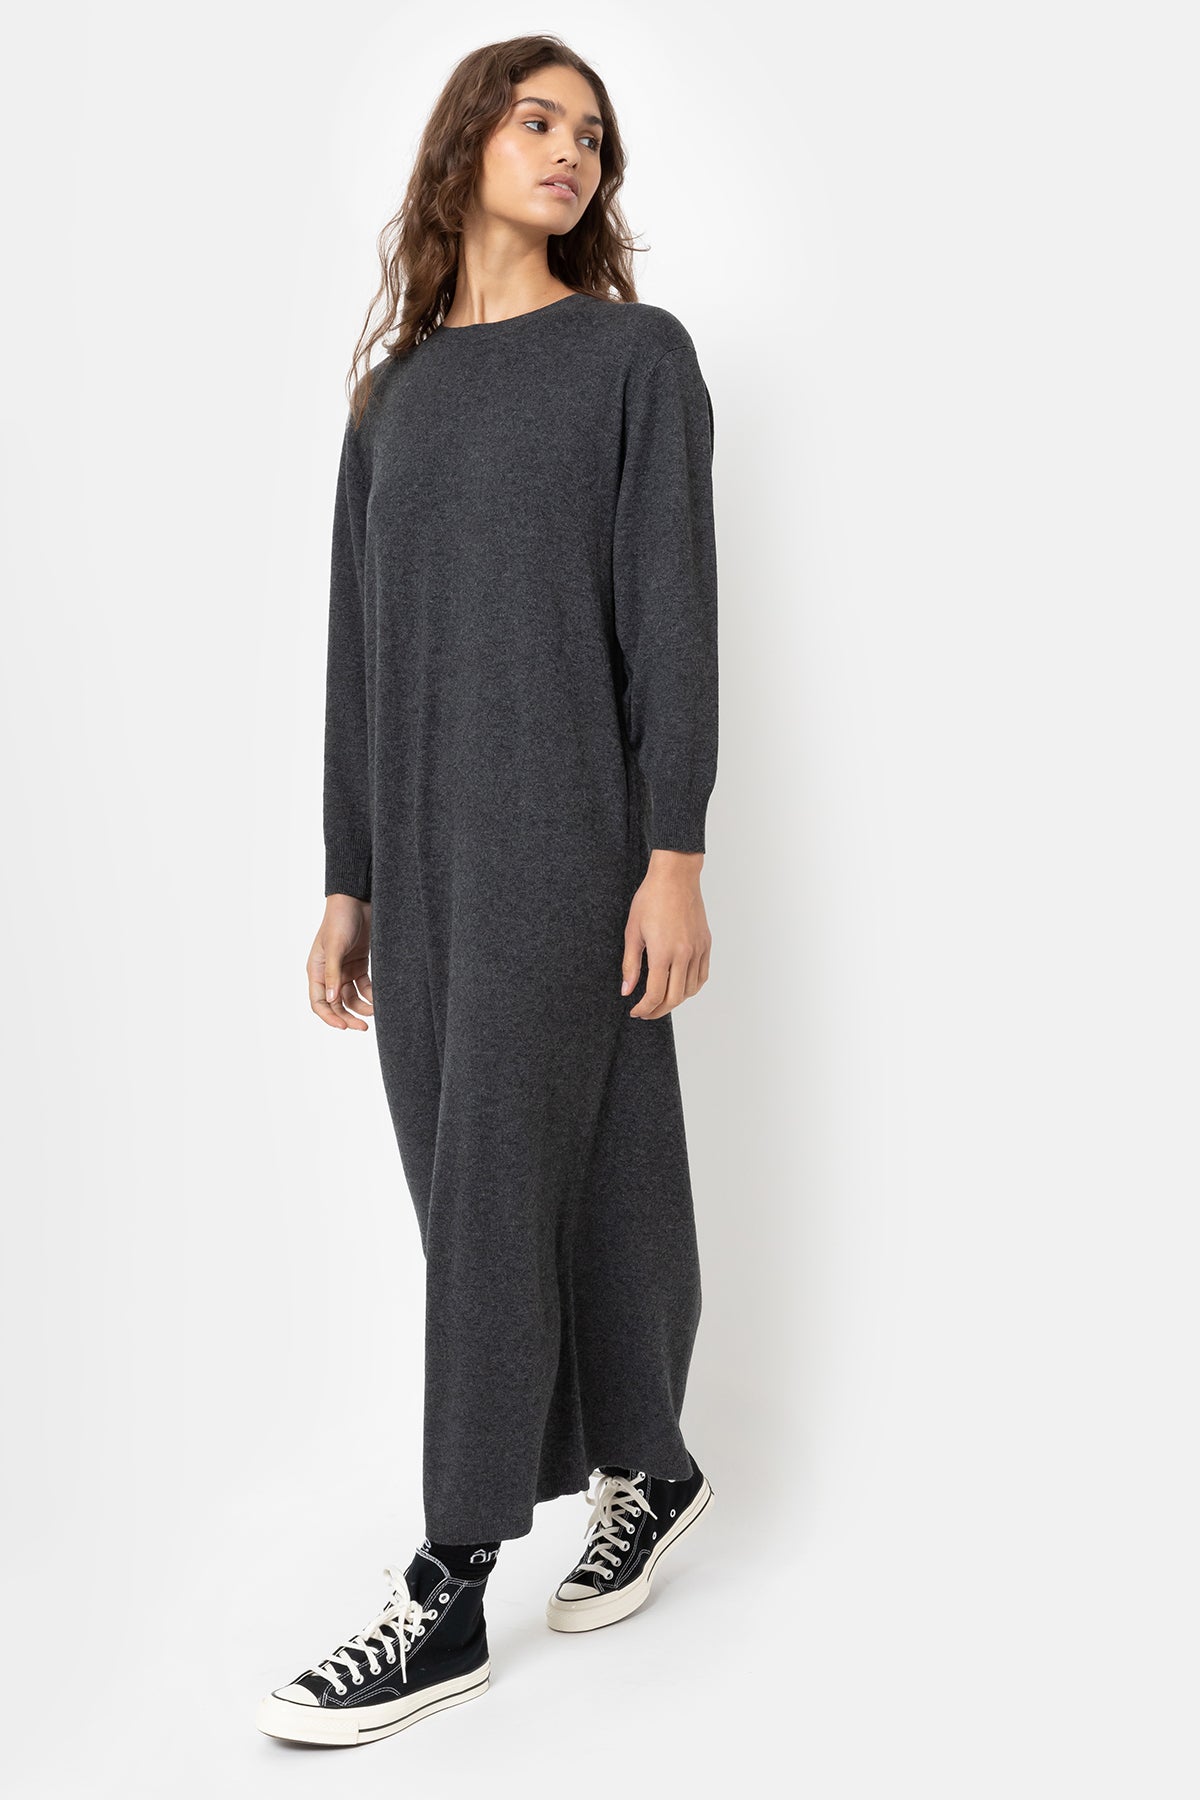 Inka Long Knitted Dress with V-Back | Charcoal Grey